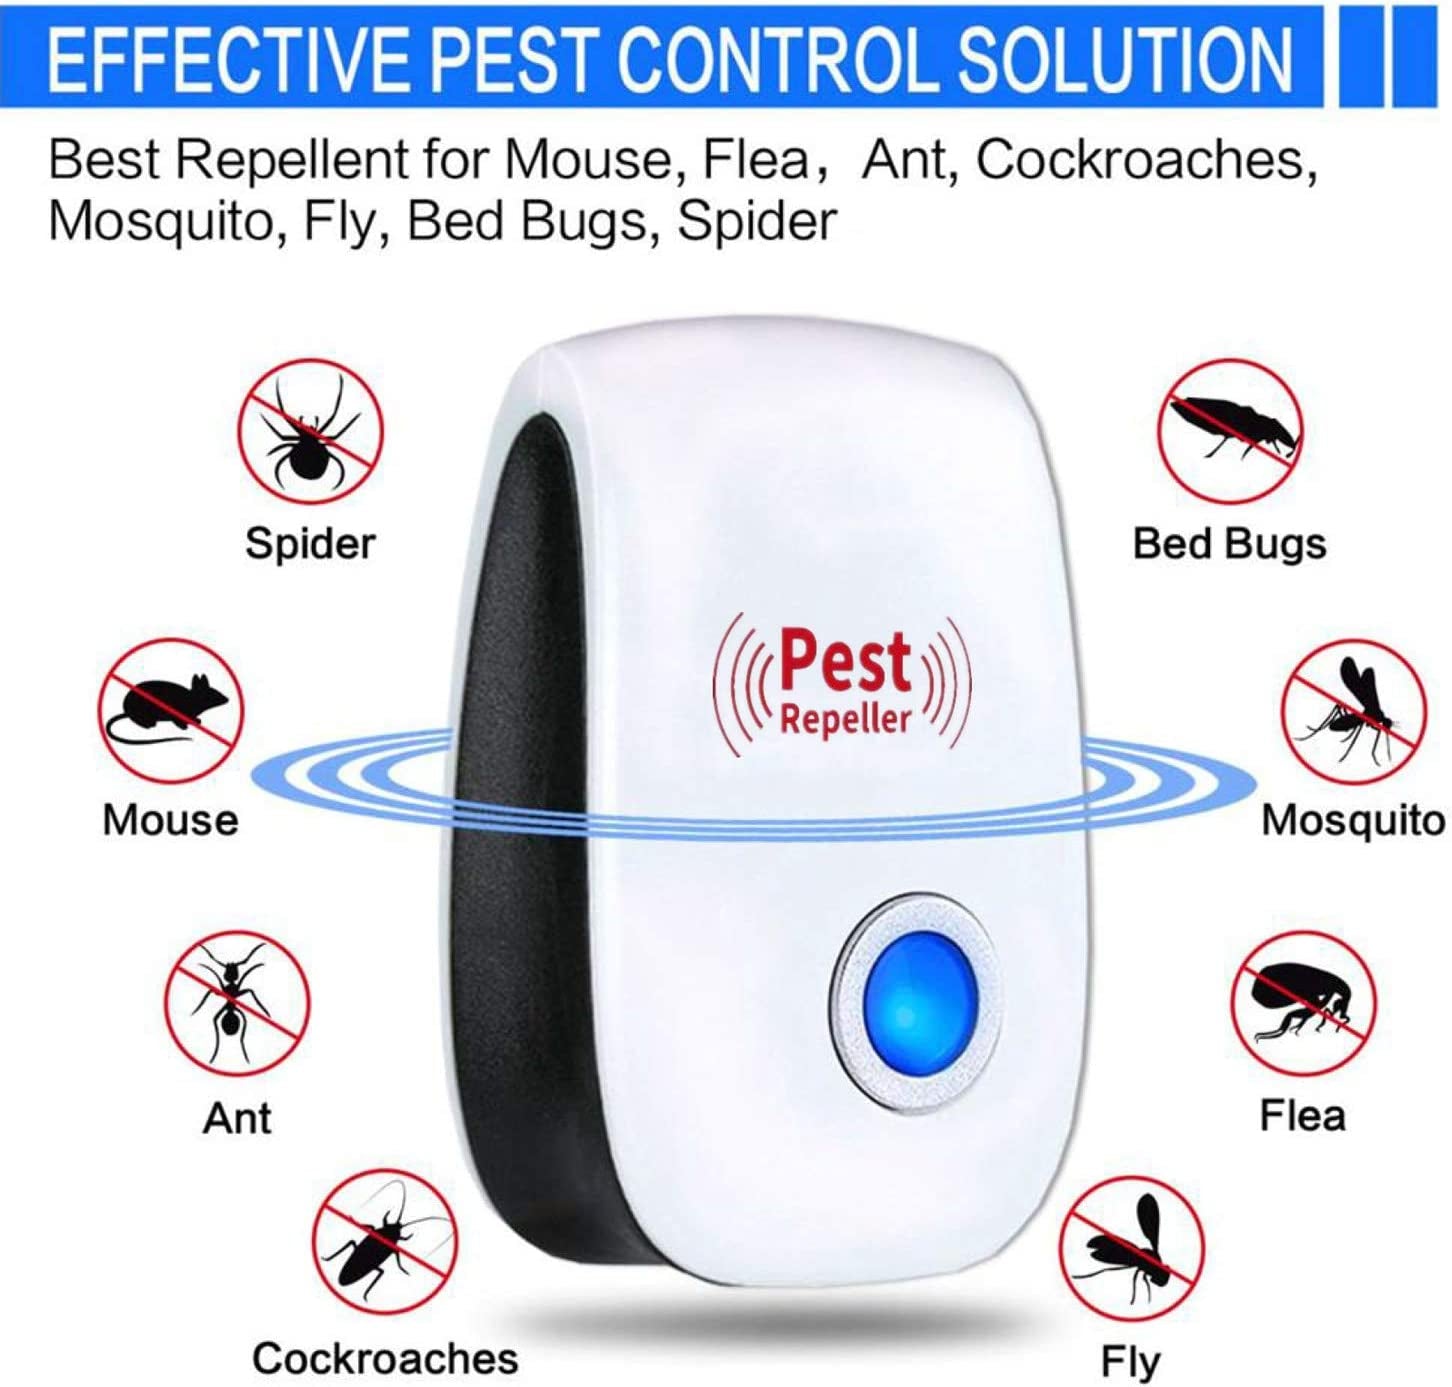 Merratric, Merratric Ultrasonic Pest Repeller 6 Pack Electronic Ultrasonic Pest Repellent Indoor Plug in Pest Control Ultrasonic Repellent for Mice Cockroach Spider Ant Mosquito Bug Insect